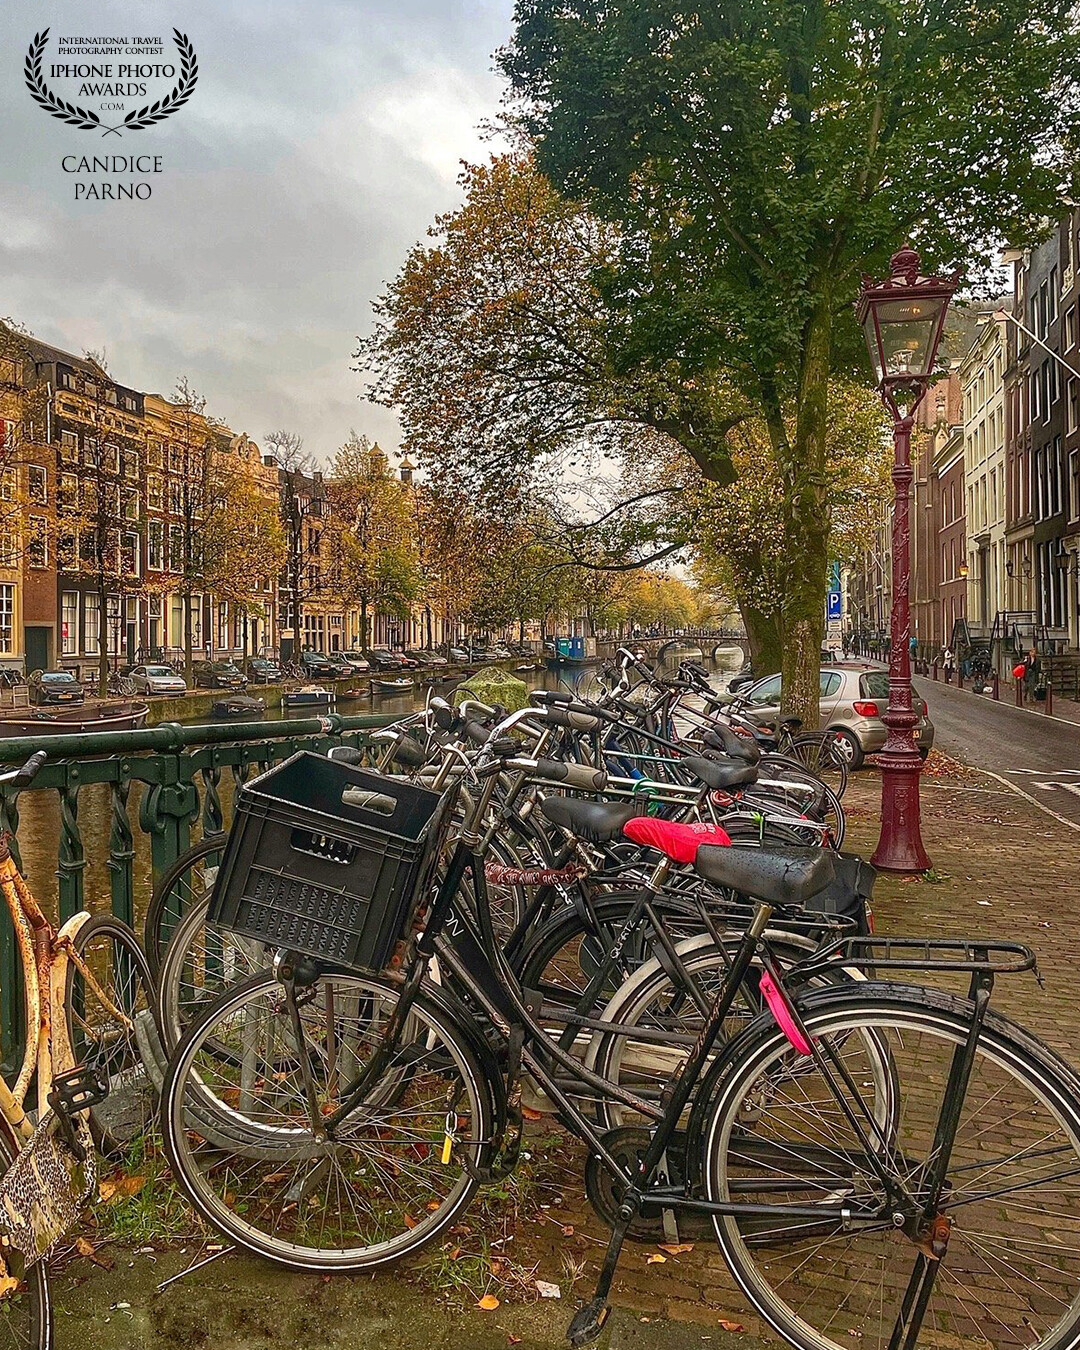 On my first trip to Amsterdam I was in constant awe of the number of bicycles everywhere.  This is just one of many photos of the iconic Amsterdam River and bicycles I took on that trip.